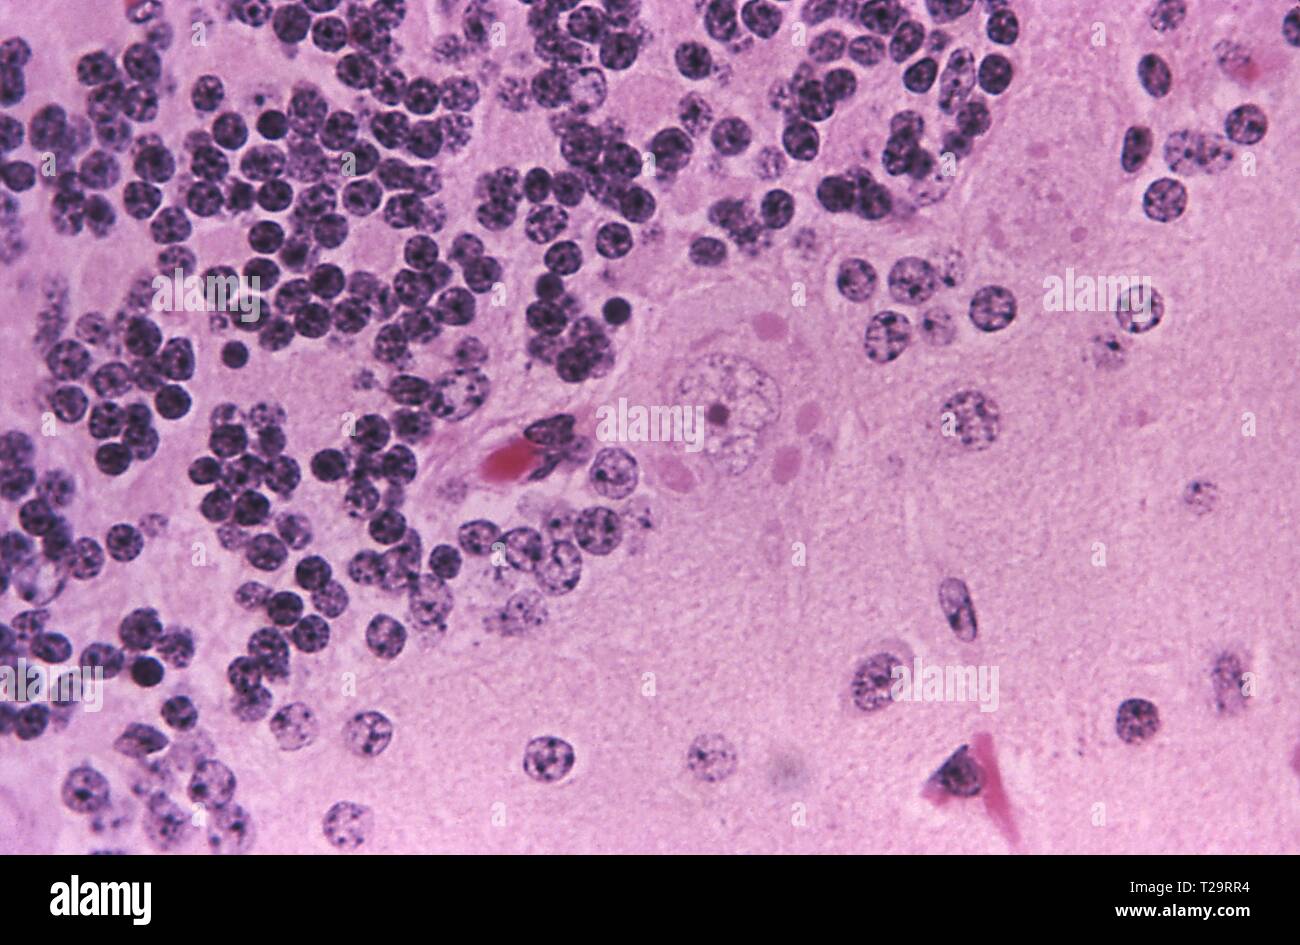 Hematoxylin-eosin stained photomicrograph of the cellular changes associated with rabies encephalitis, 1971. Image courtesy Centers for Disease Control and Prevention (CDC) / Dr Daniel P. Perl. () Stock Photo